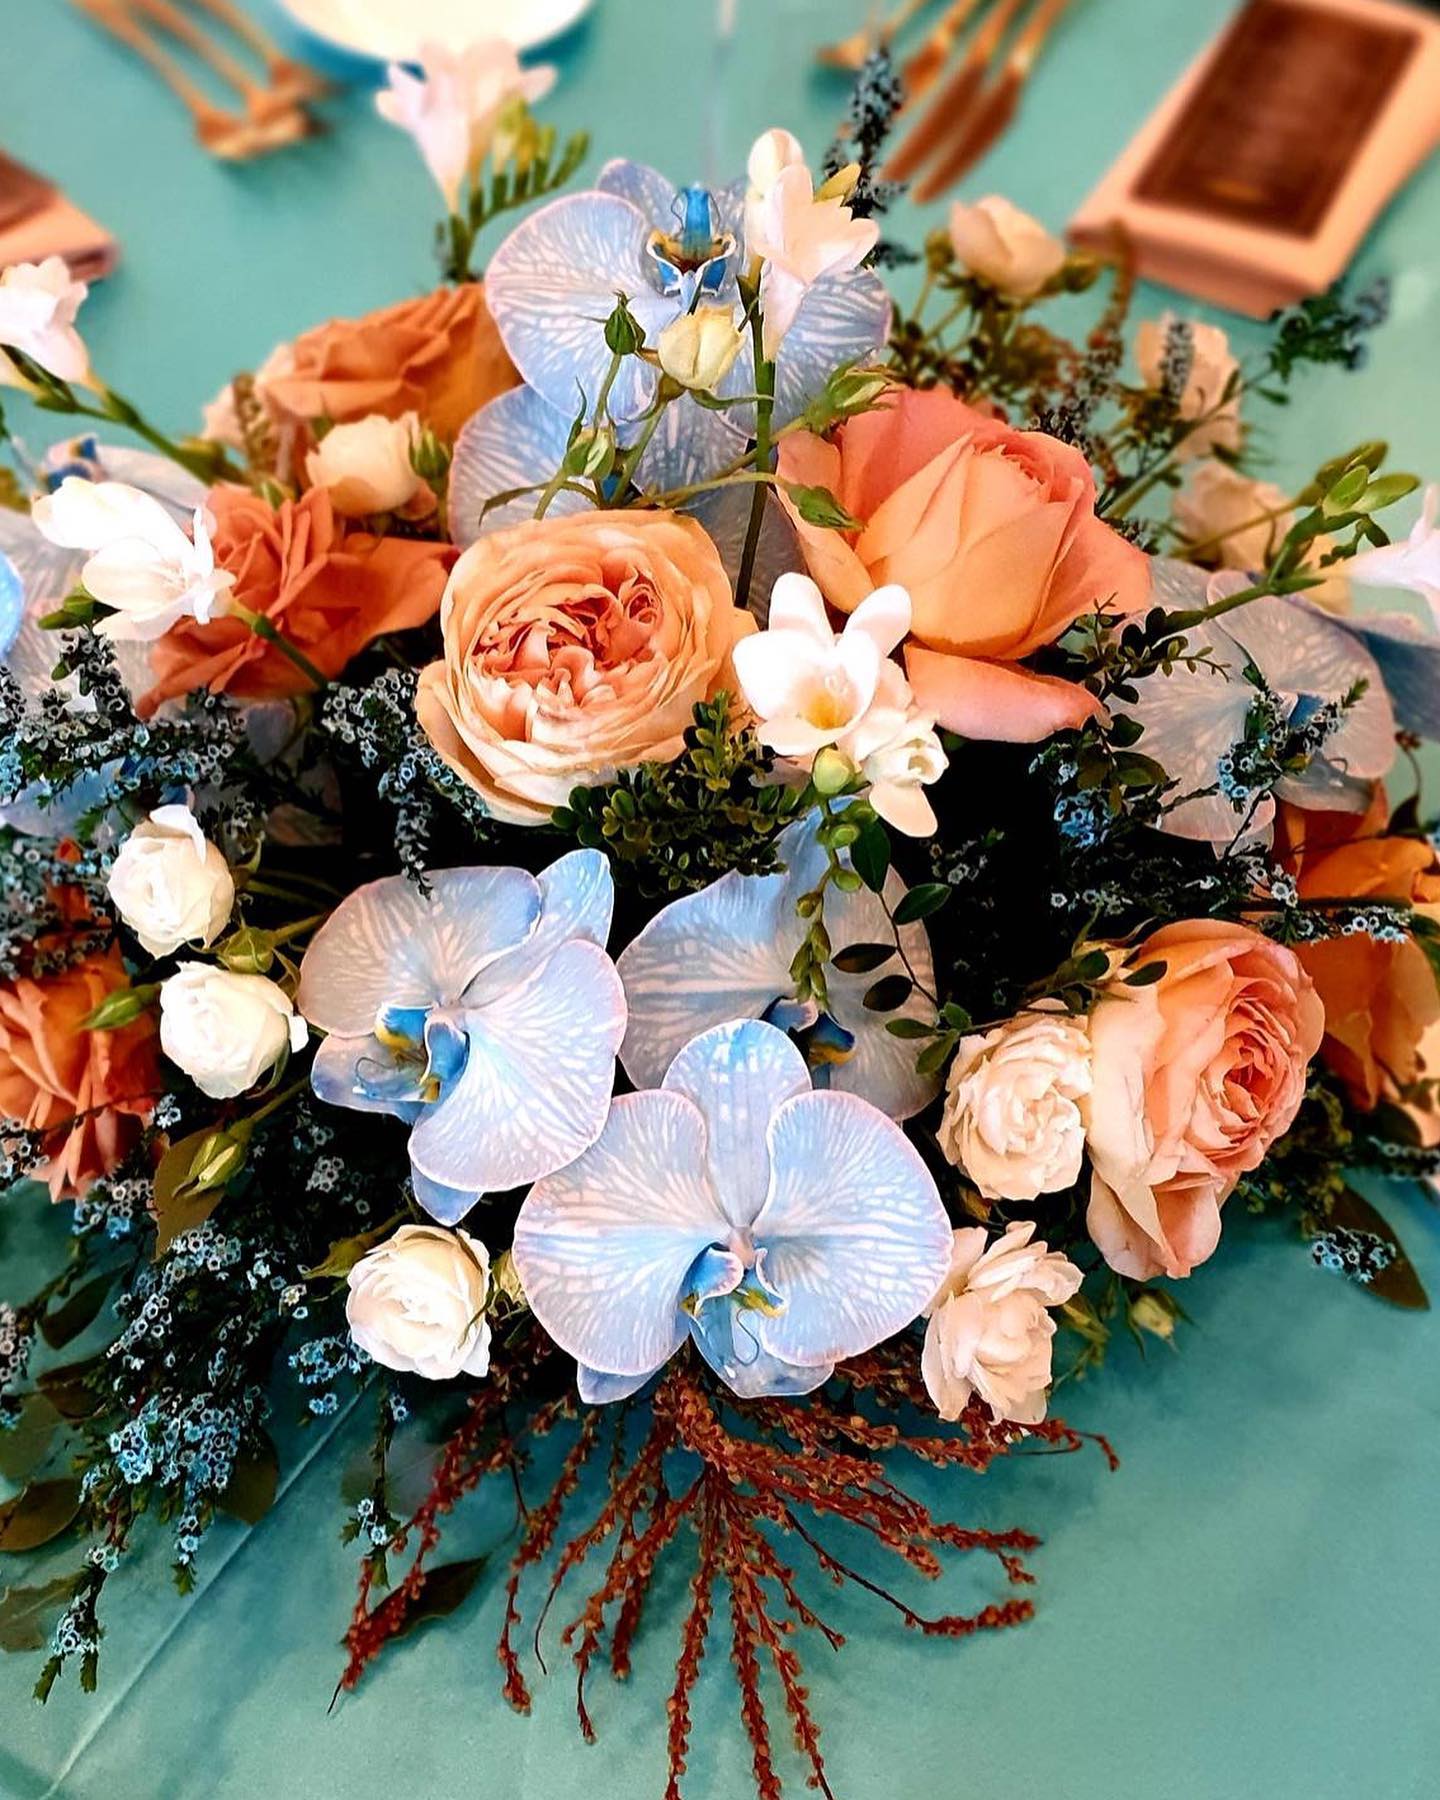 - Oh I Do Like to Be Beside the Seaside…
Beach inspired centrepieces with aquamarine orchids and driftwood vibes peeking through the roses. Tinted Thryptomene for a splash of sea spray and buddy Andromeda to mimic the sand dune Tussock grass.